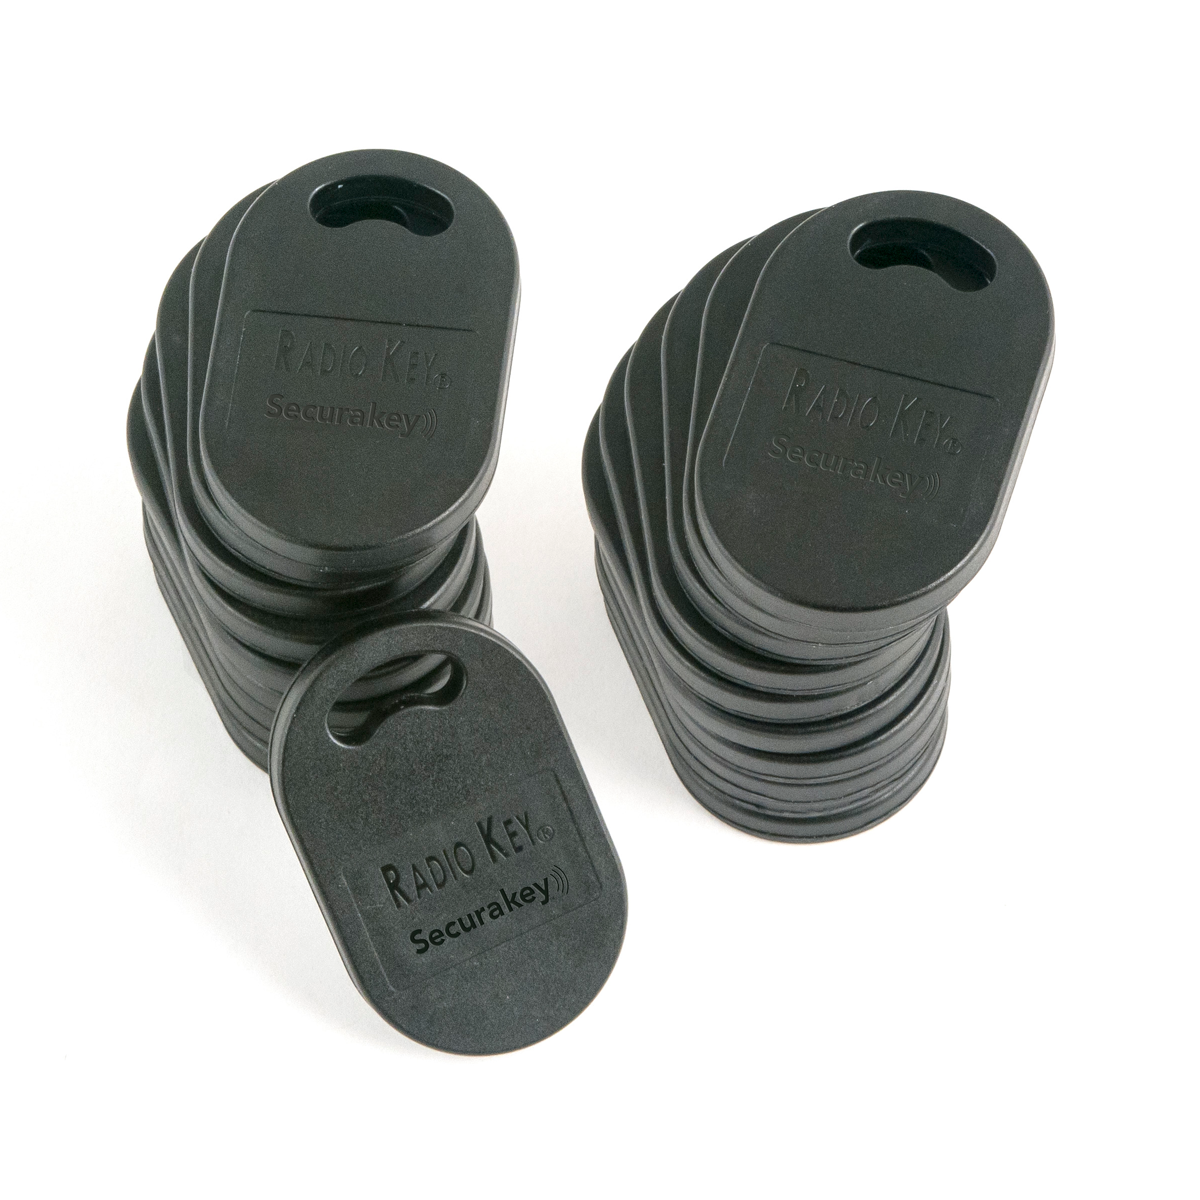 Primary image for Security Brands 40-021 SecuraKey 125KHz Key Tag Fob Facility Code F4 25 Pieces